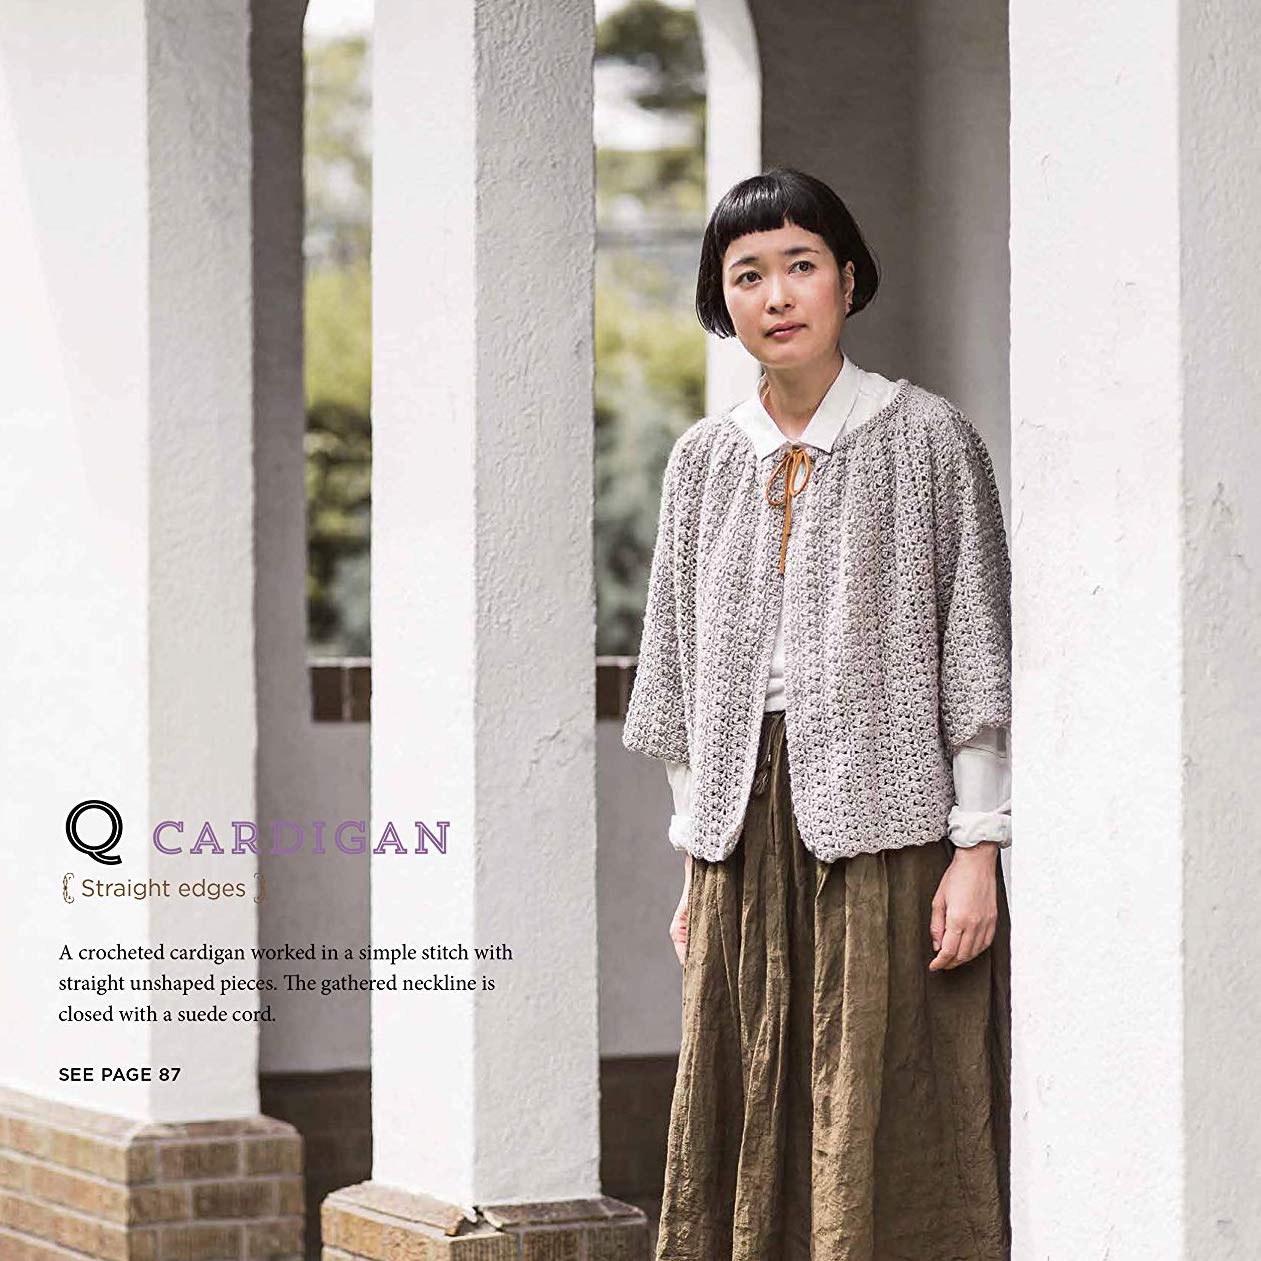 Japanese Knitting; Patterns for Sweaters , Scarves and More